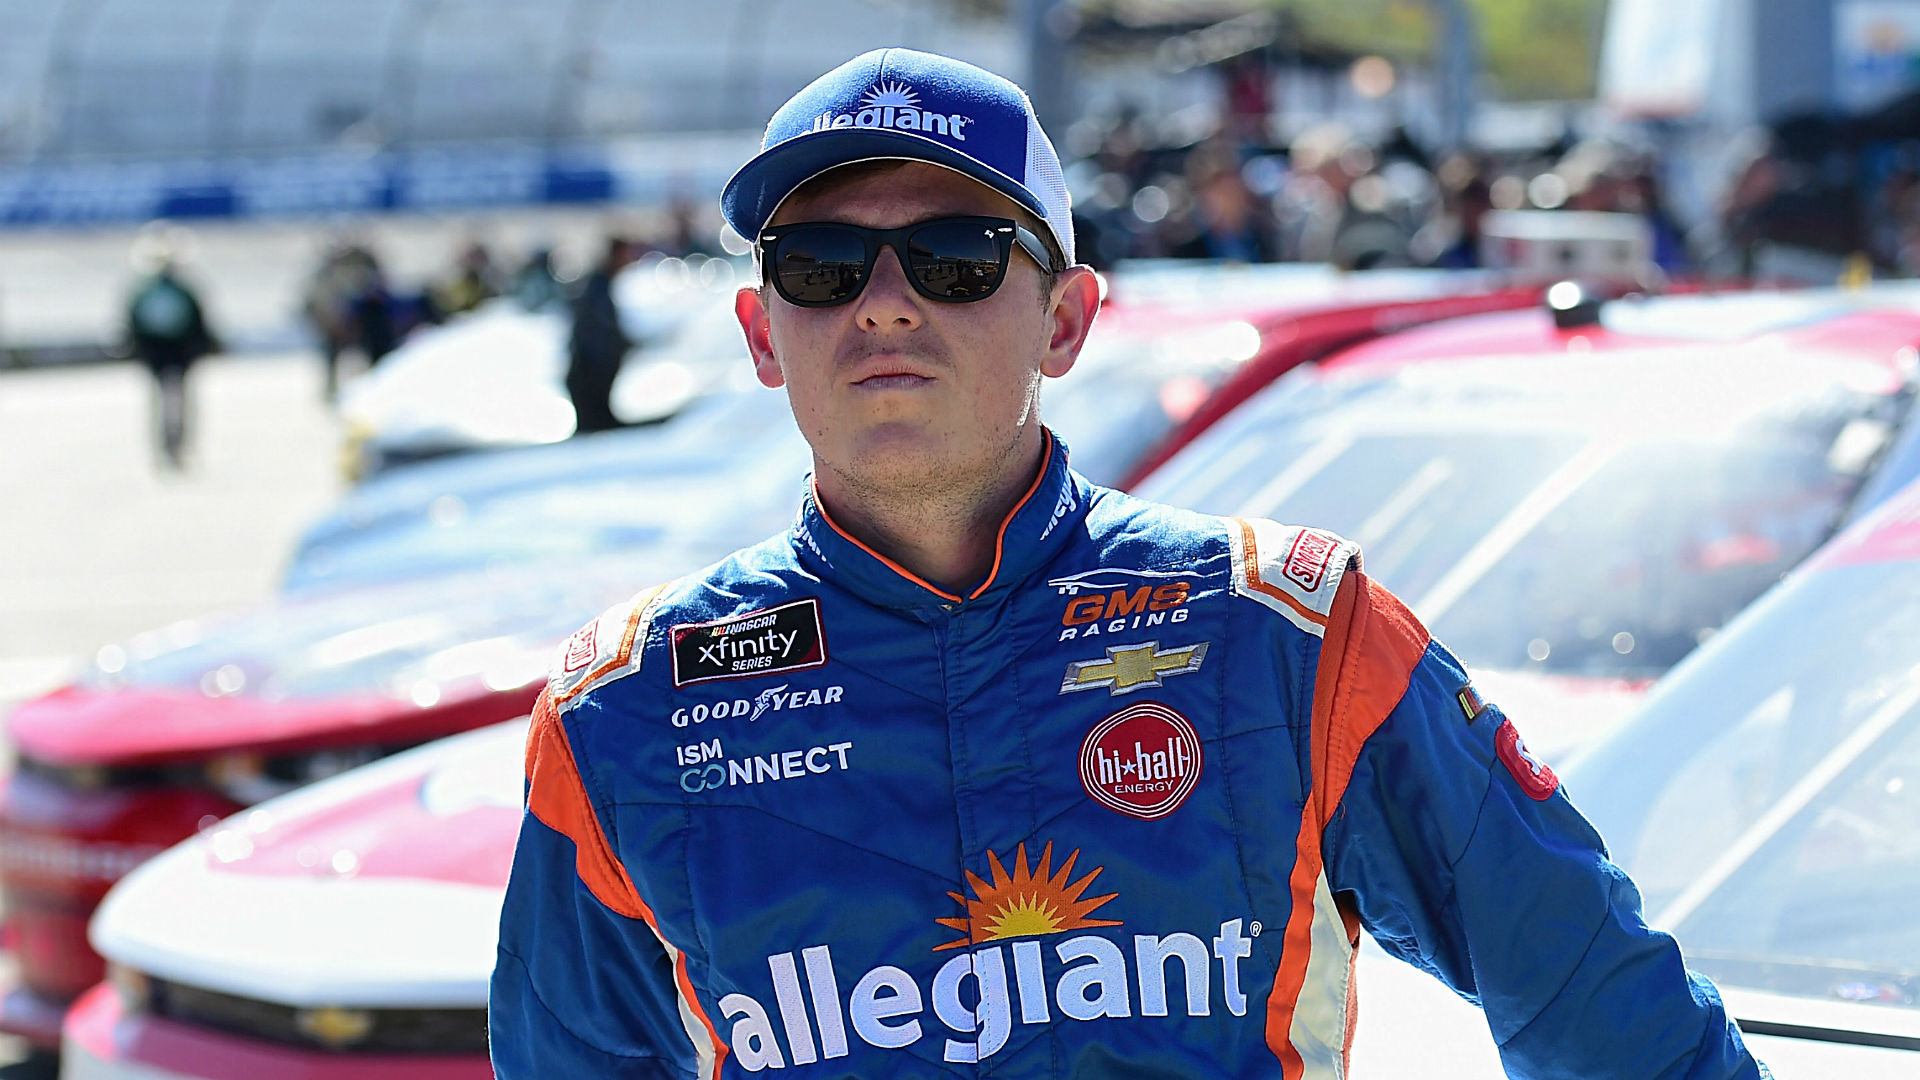 NASCAR driver Spencer Gallagher suspended indefinitely for violating substance abuse policy